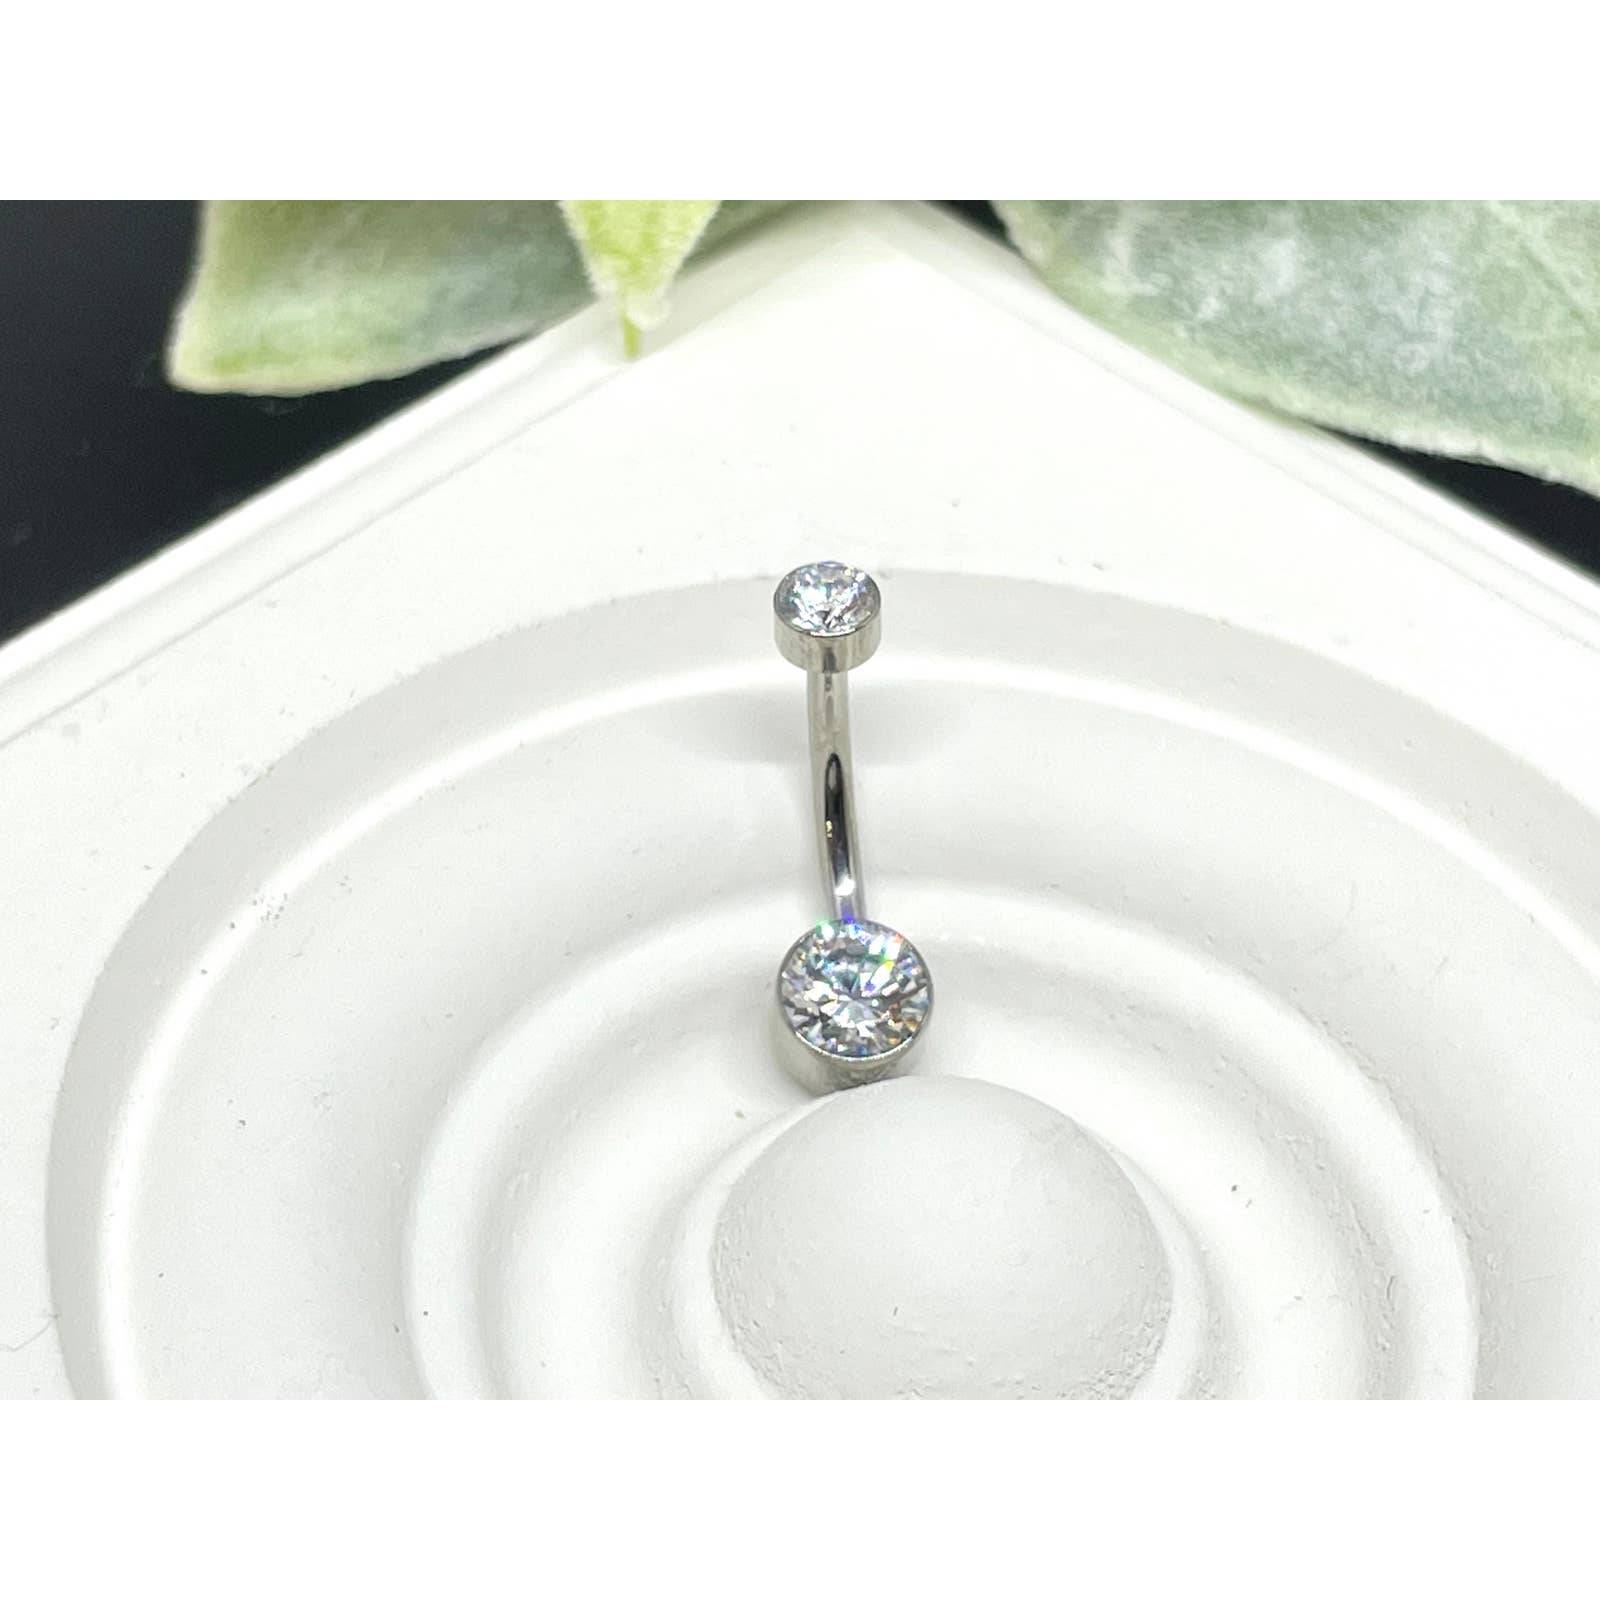 Implant Grade Titanium Belly Ring - Belly Button Ring